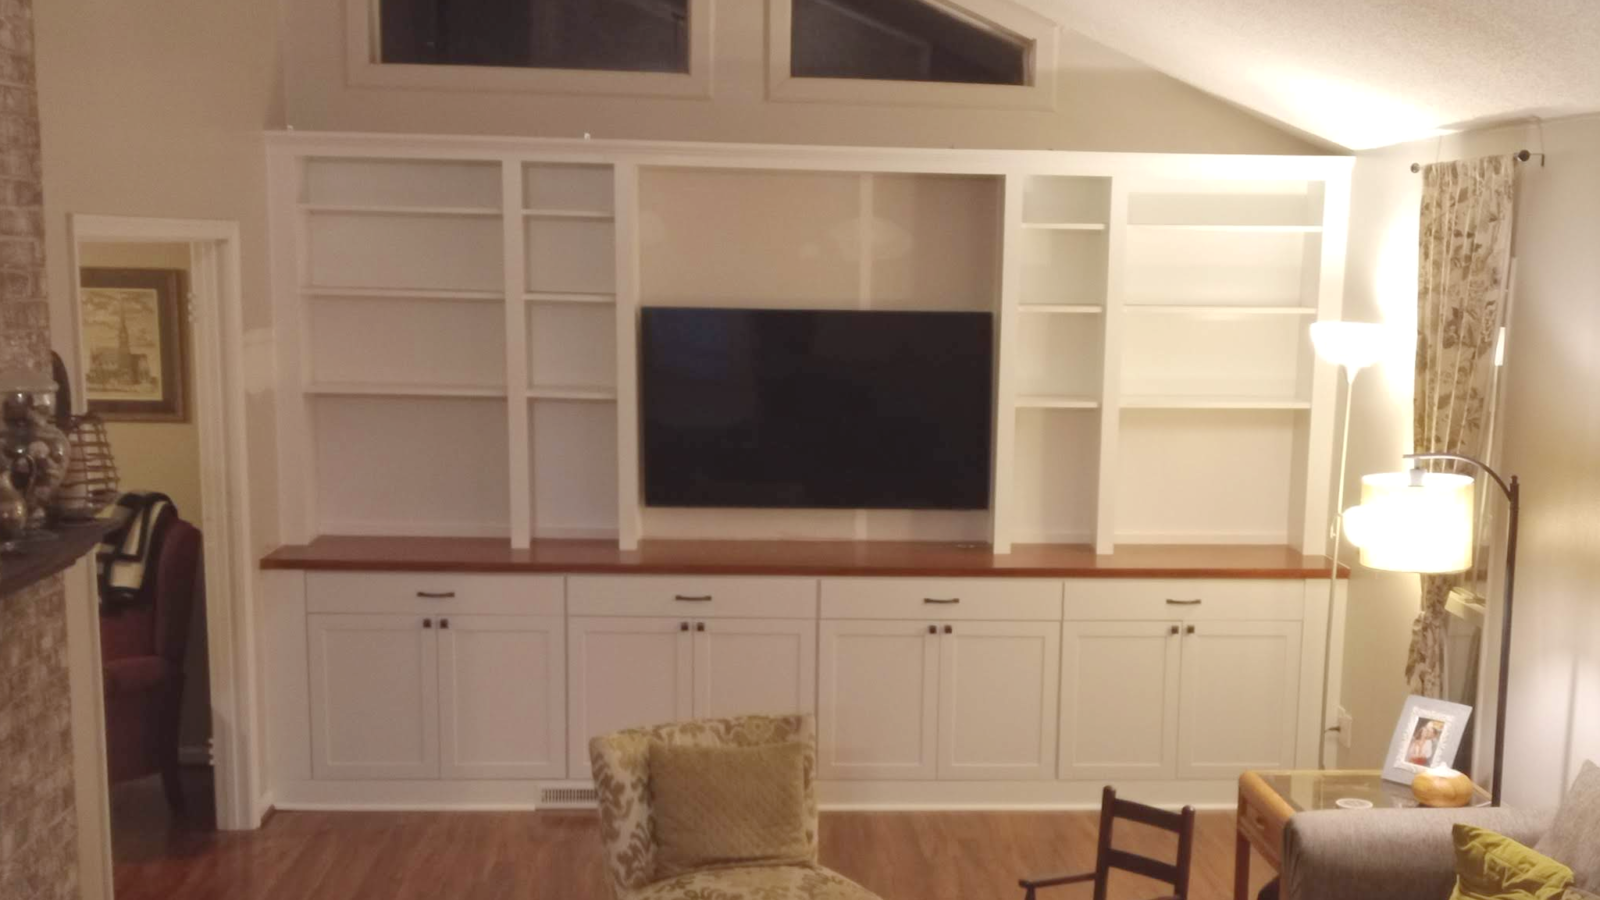 Bookcases & Cabinets: BILLY Cases w Standard Cabinets and TV